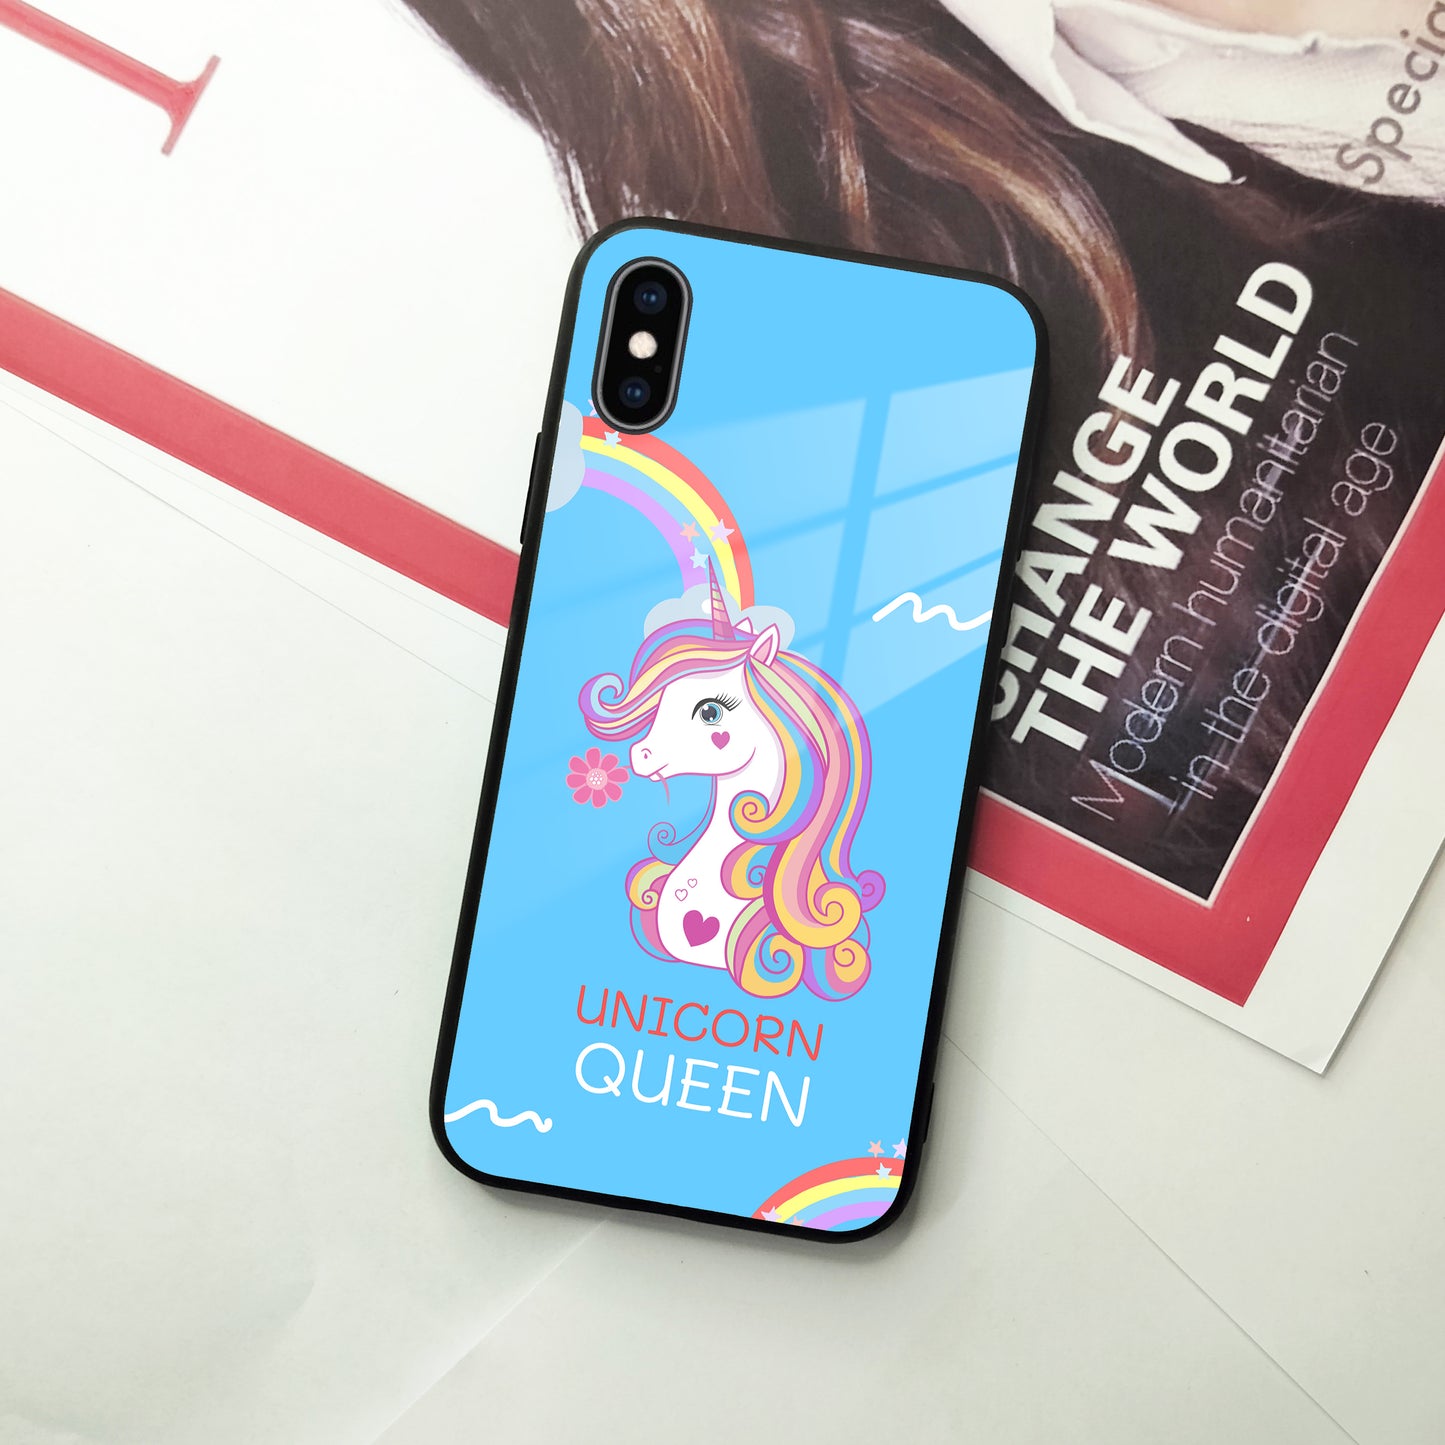 Blue Unicorn Queen Glass Phone Case For iPhone